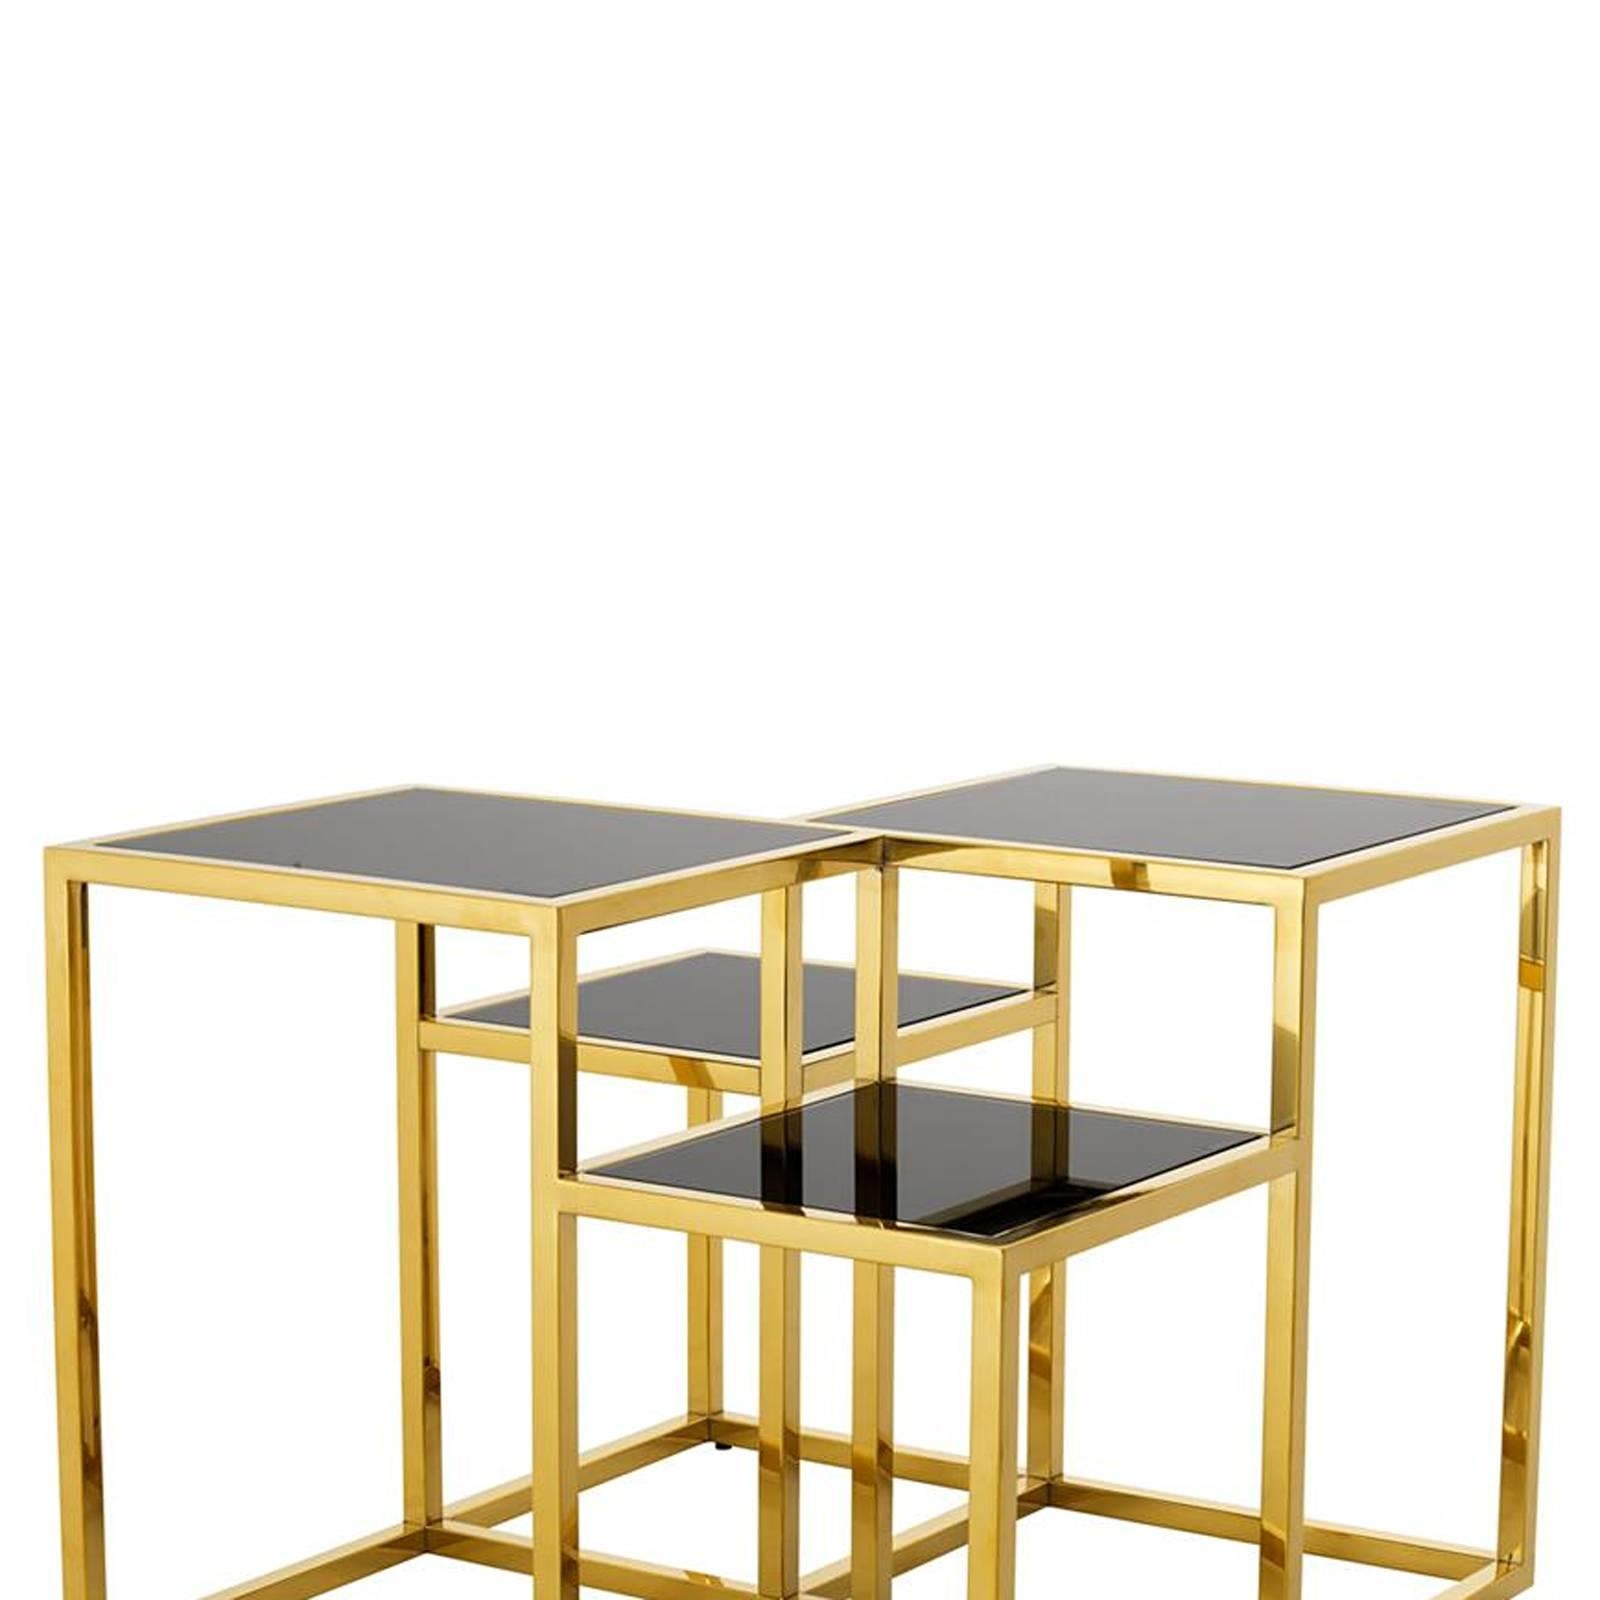 Chinese Square Tops Side Table in Gold Finish